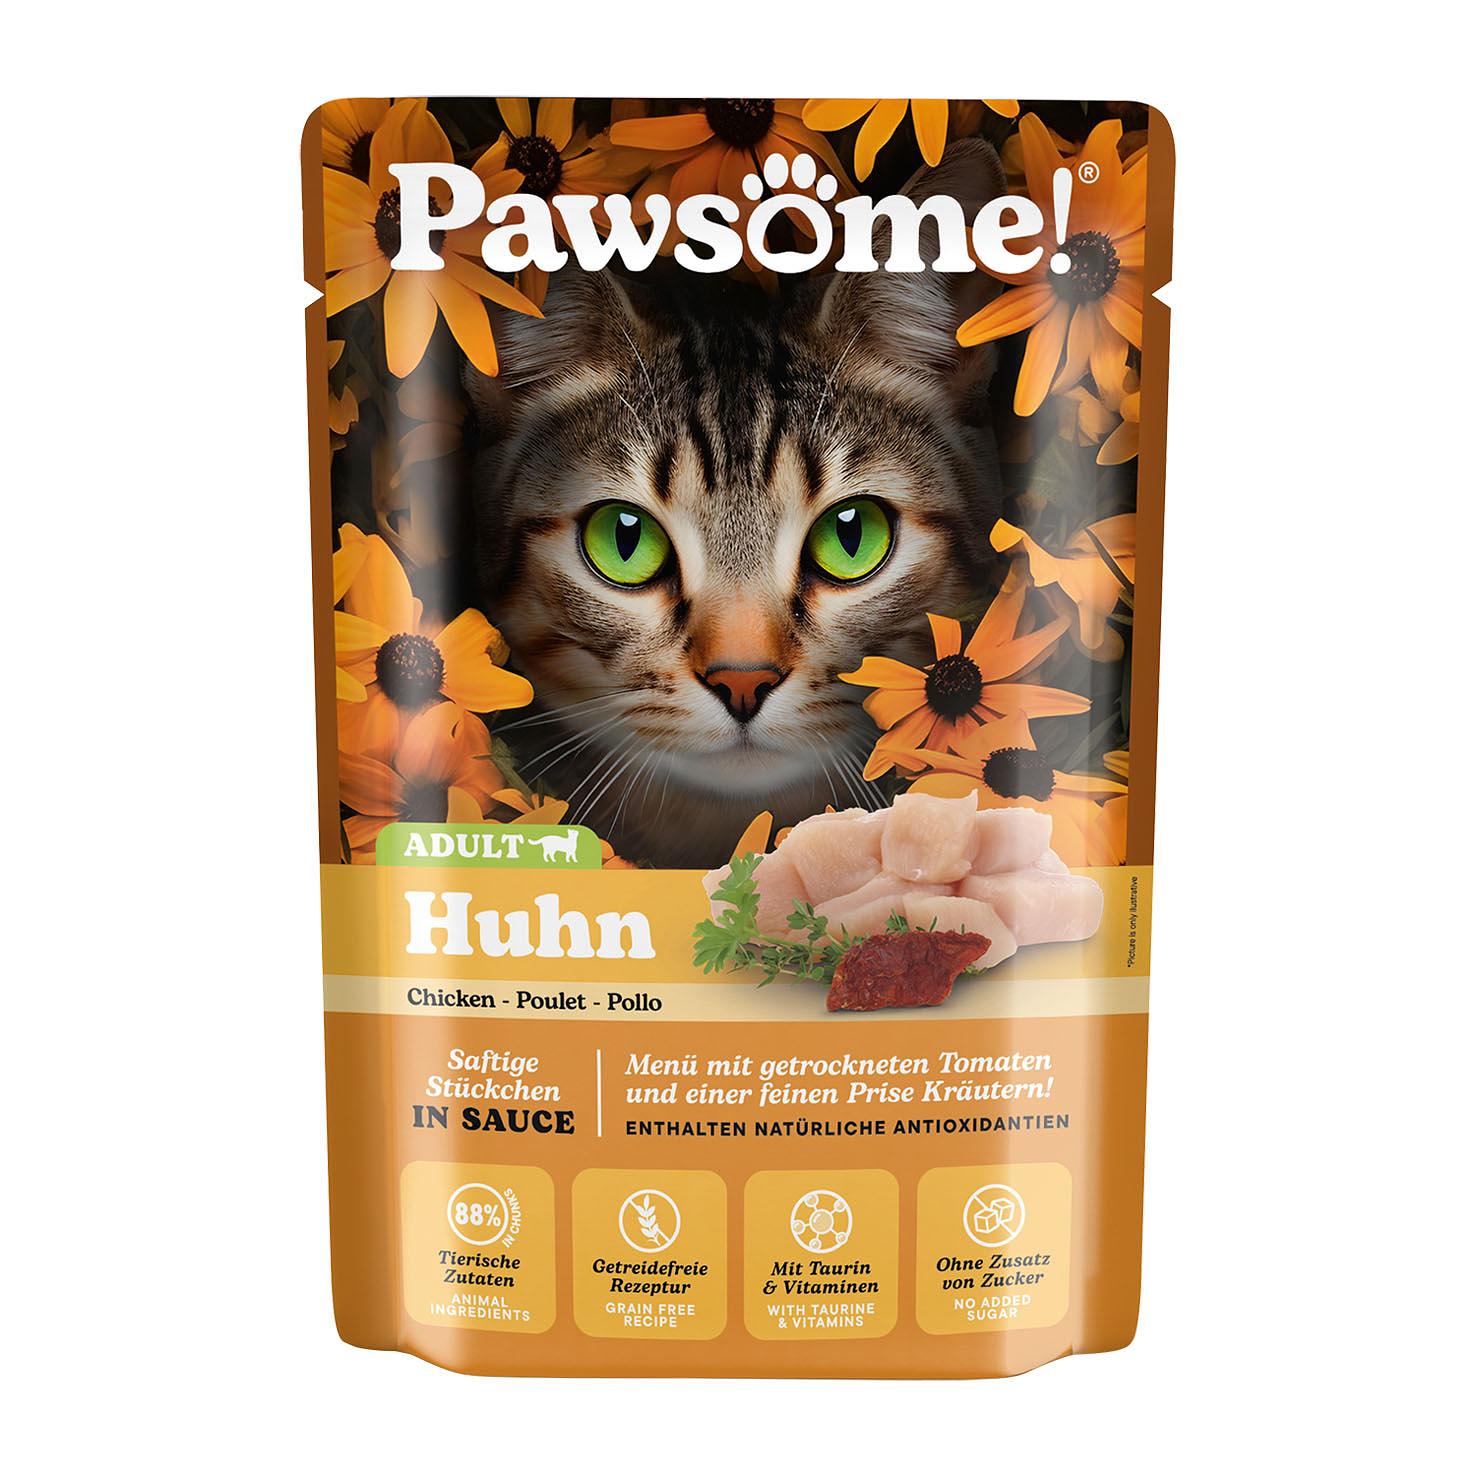 Pawsome Adult poulet